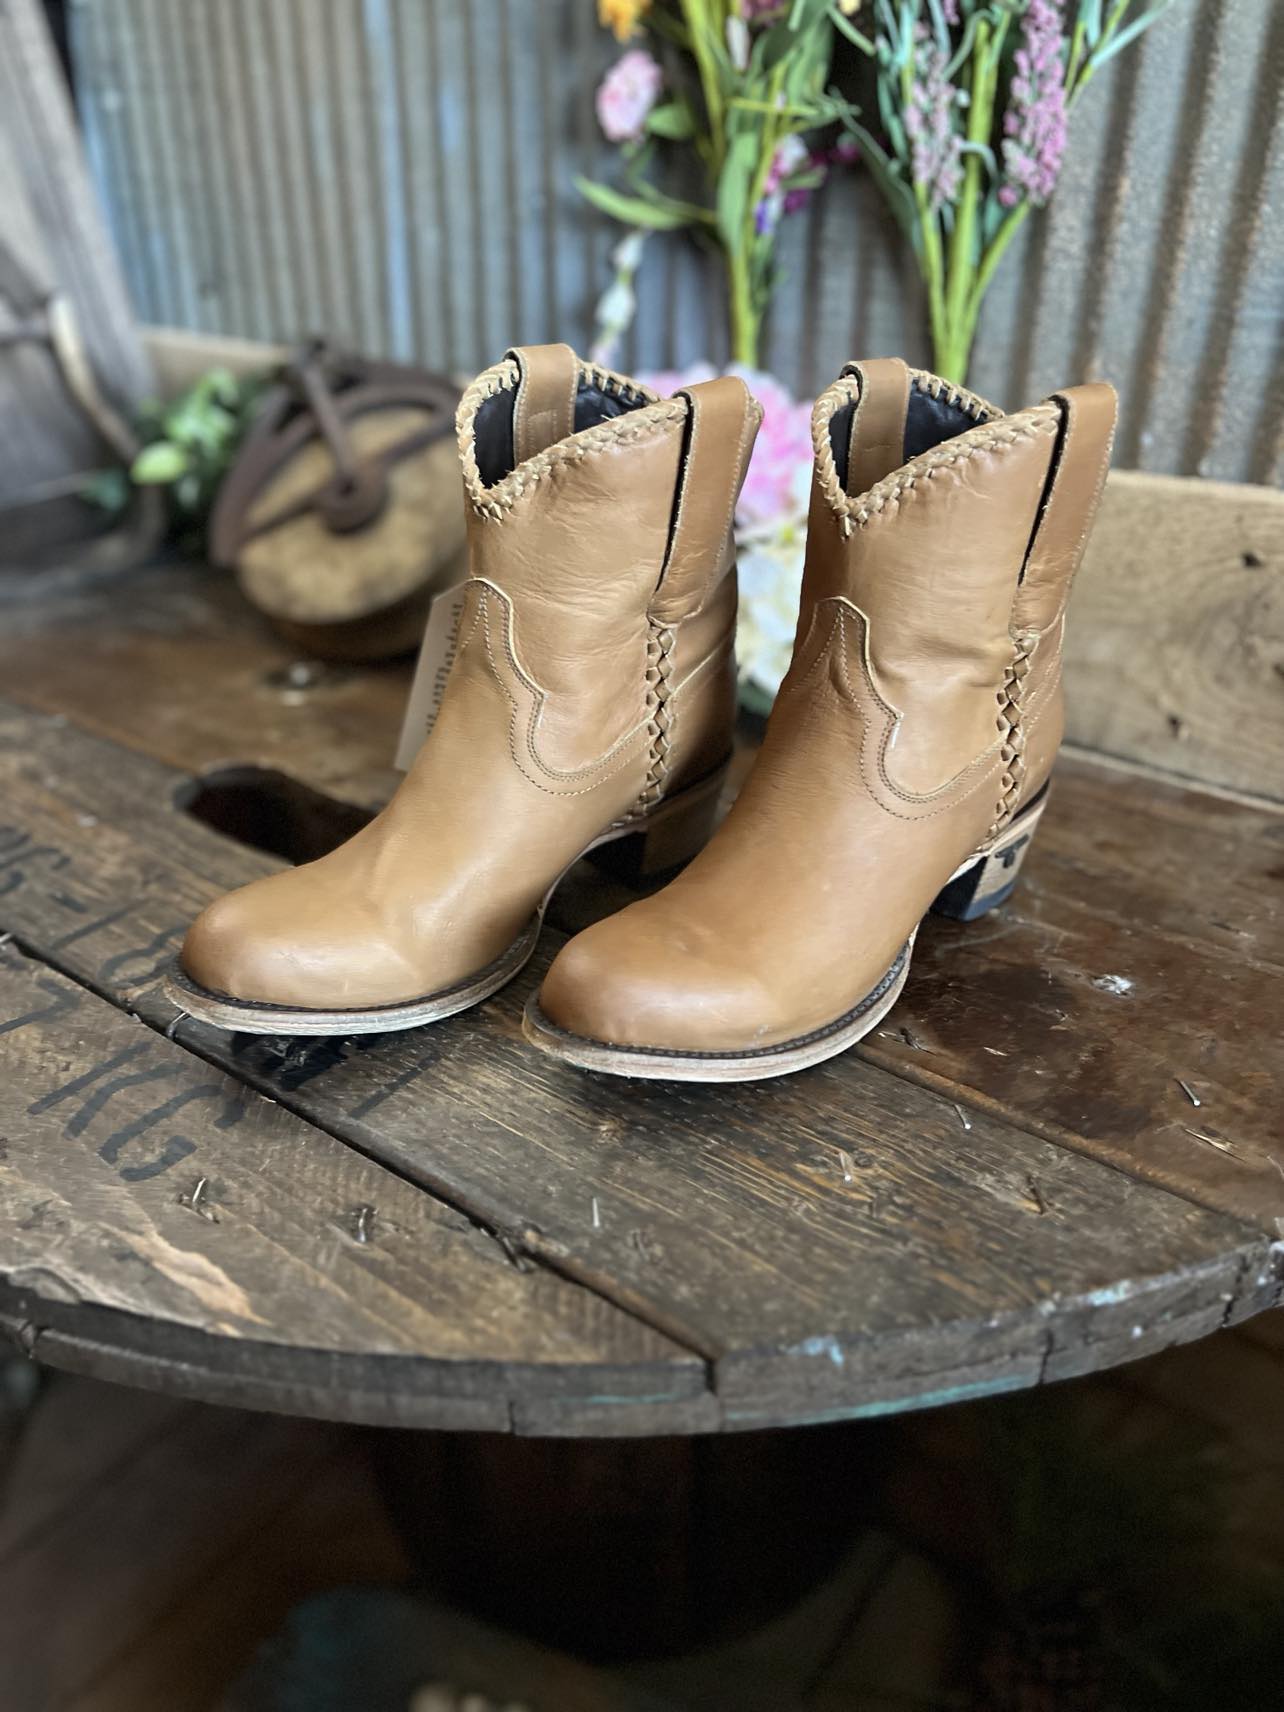 Lane Boots Plain Jane Saddle Bootie-Women's Boots-Lane Boots-Lucky J Boots & More, Women's, Men's, & Kids Western Store Located in Carthage, MO